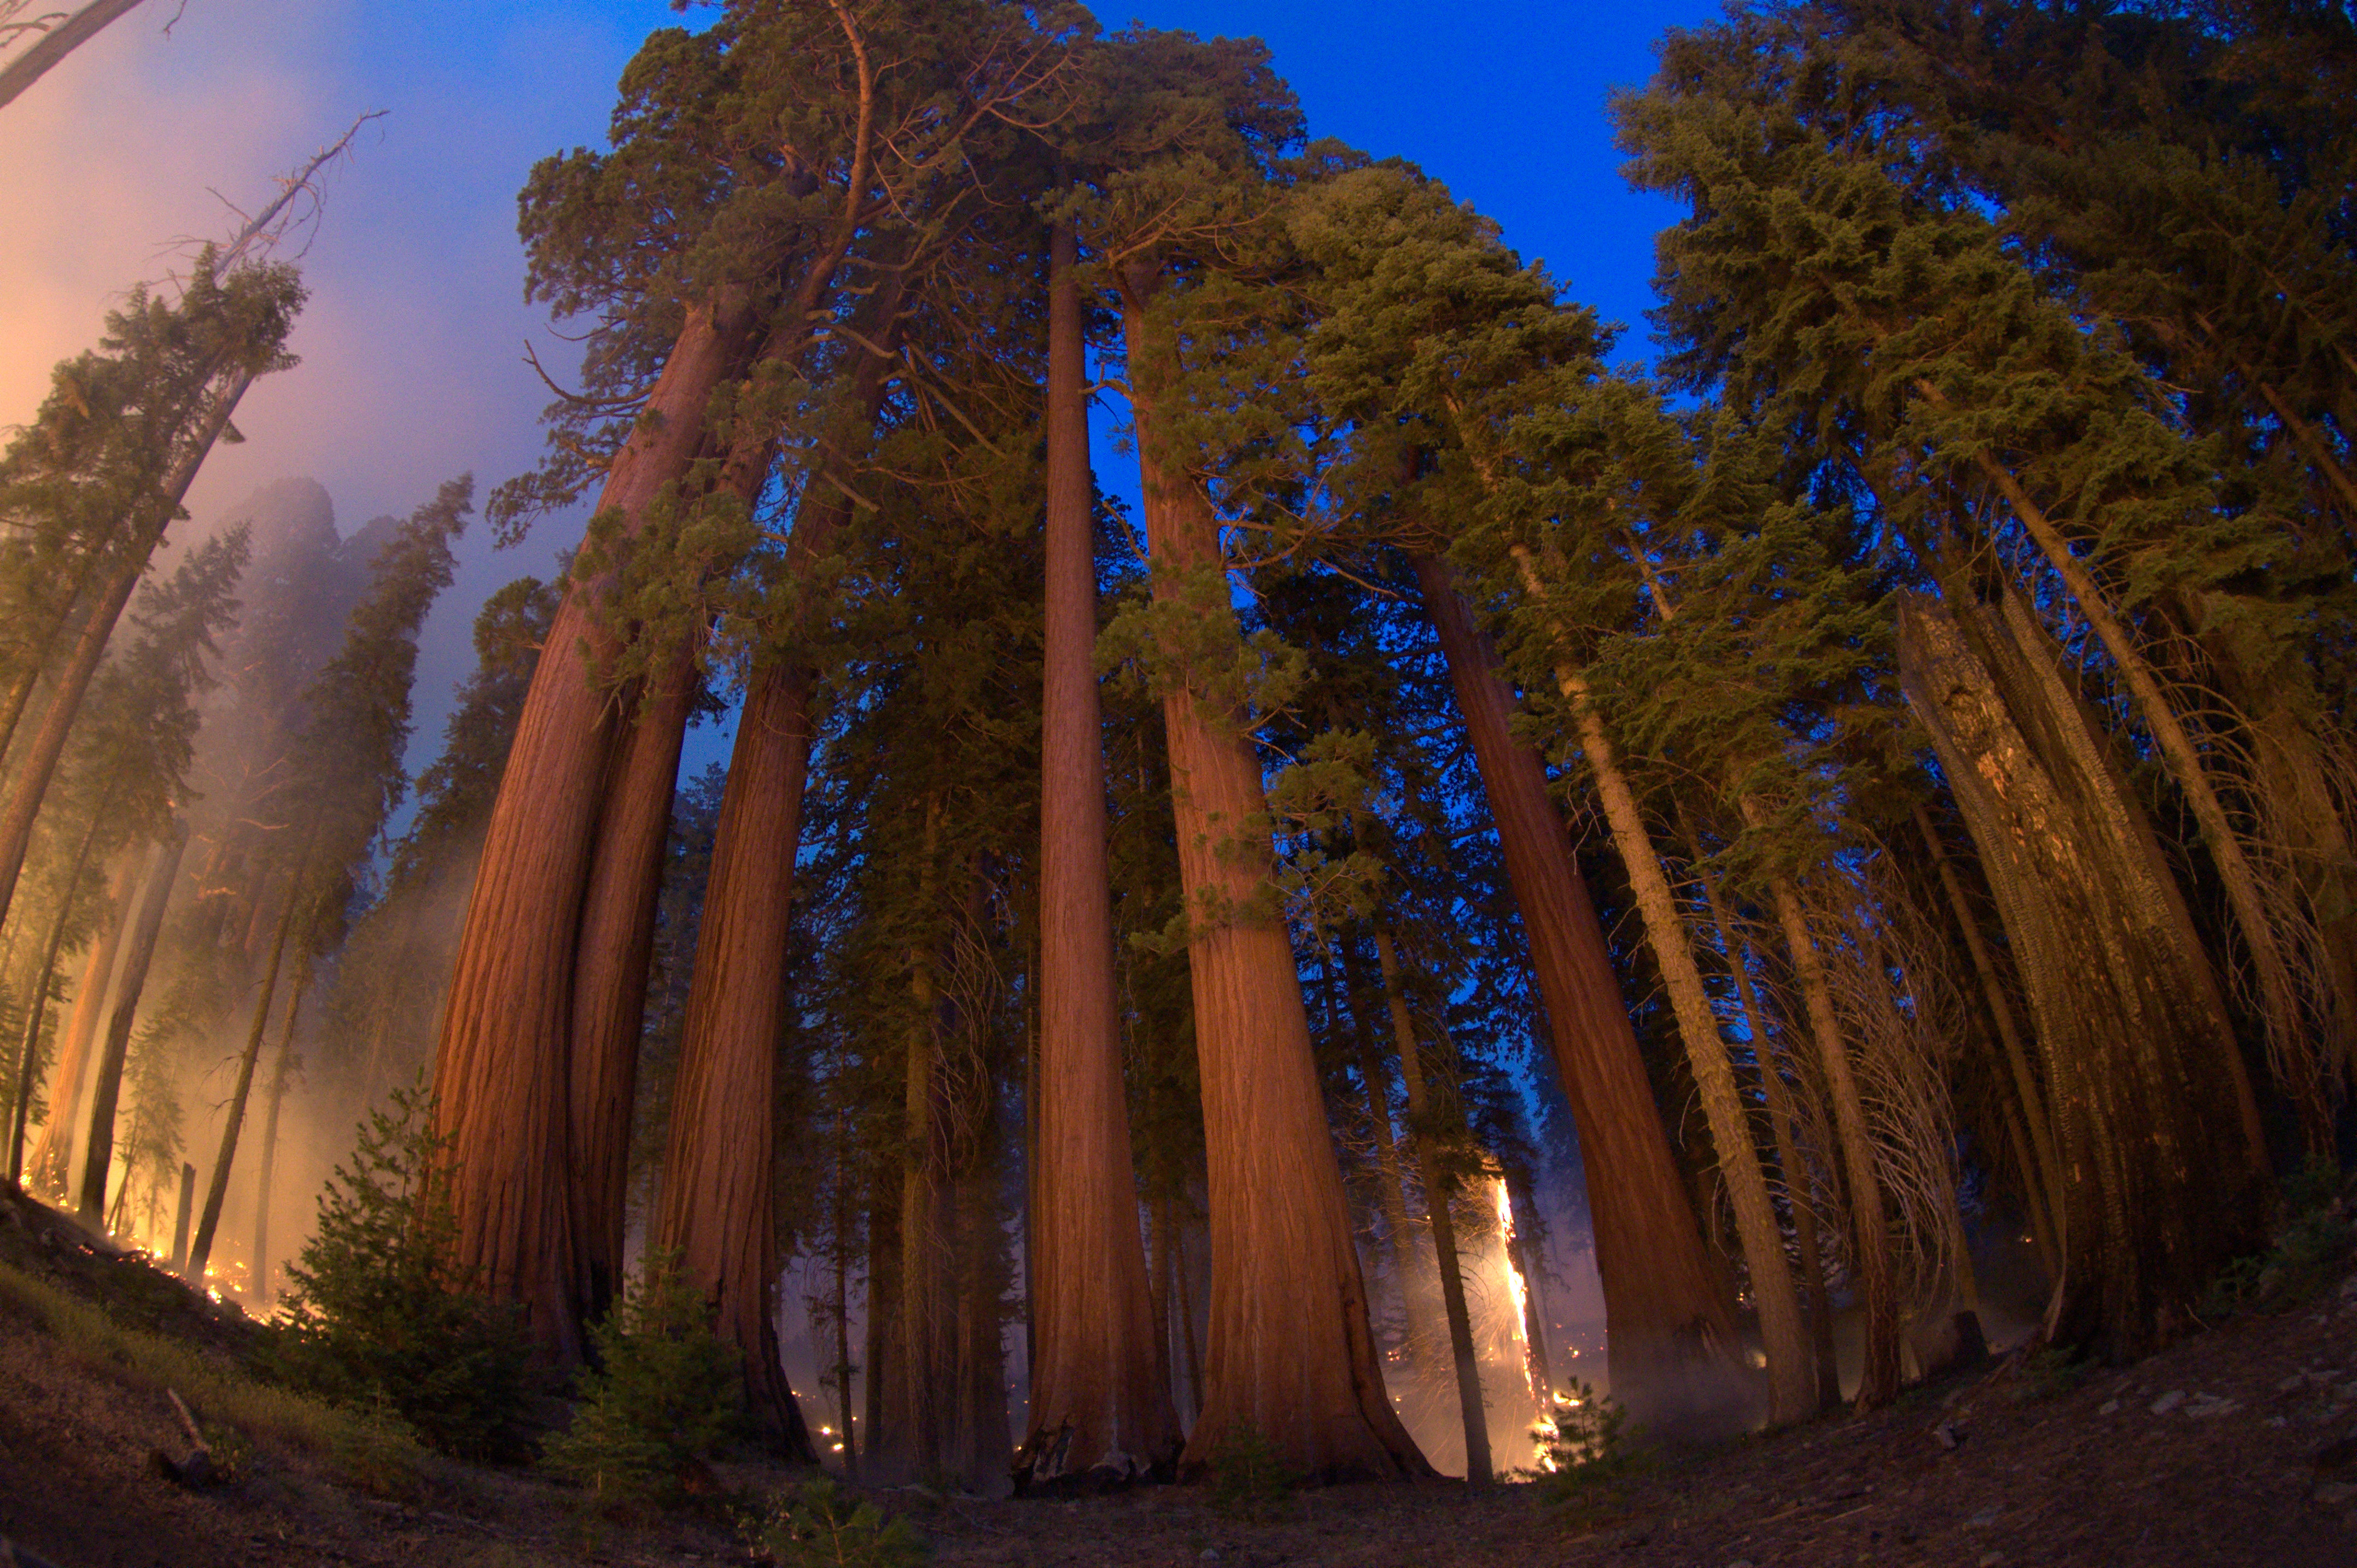 Giant Sequoias And Fire Sequoia Kings Canyon National Parks U S National Park Service